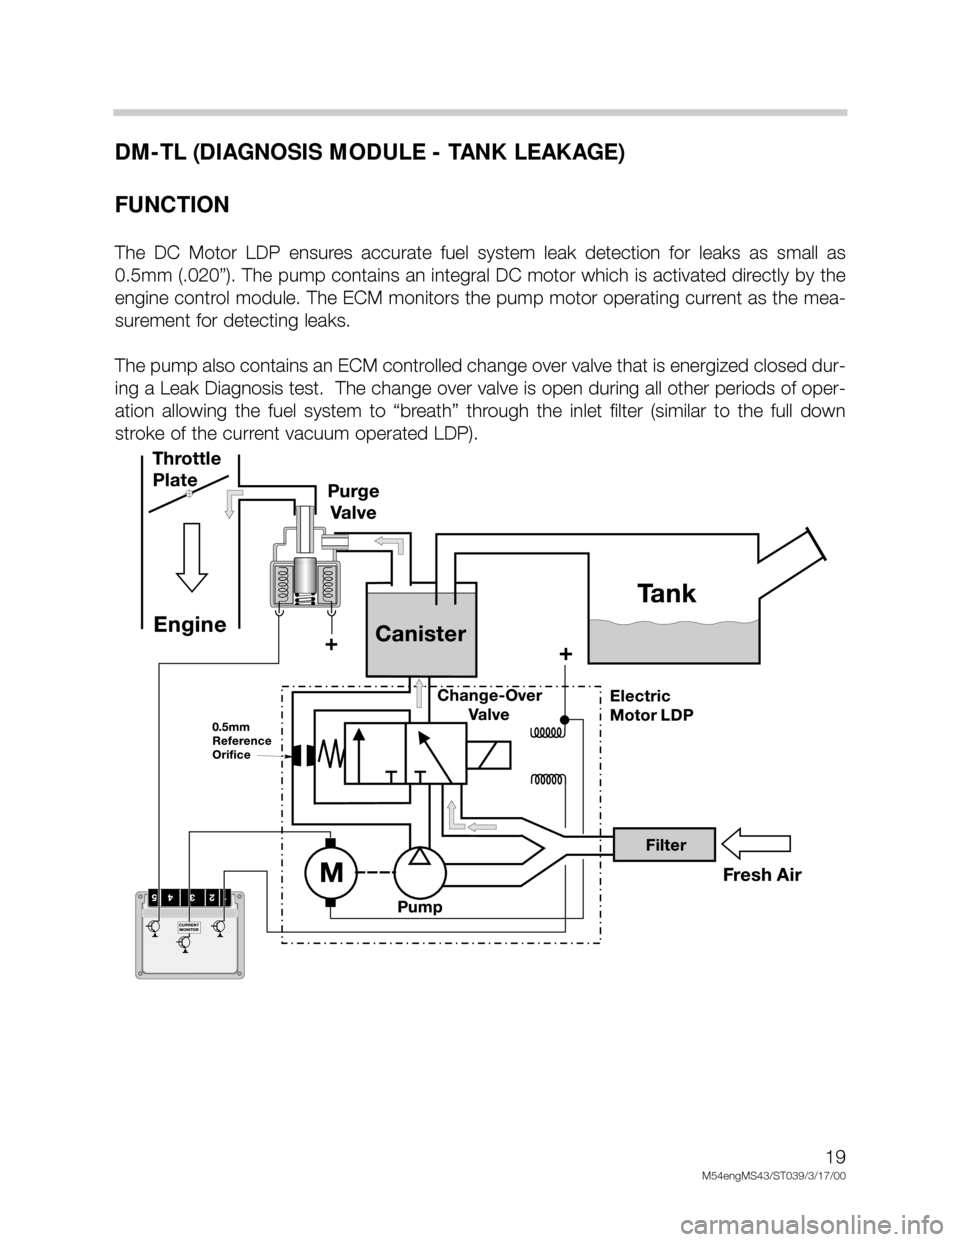 BMW X5 2001 E53 M54 Engine Workshop Manual 19
M54engMS43/ST039/3/17/00
DM-TL (DIAGNOSIS MODULE - TANK LEAKAGE)
FUNCTION
The  DC  Motor  LDP  ensures  accurate  fuel  system  leak  detection  for  leaks  as  small  as
0.5mm (.020”). The pump 